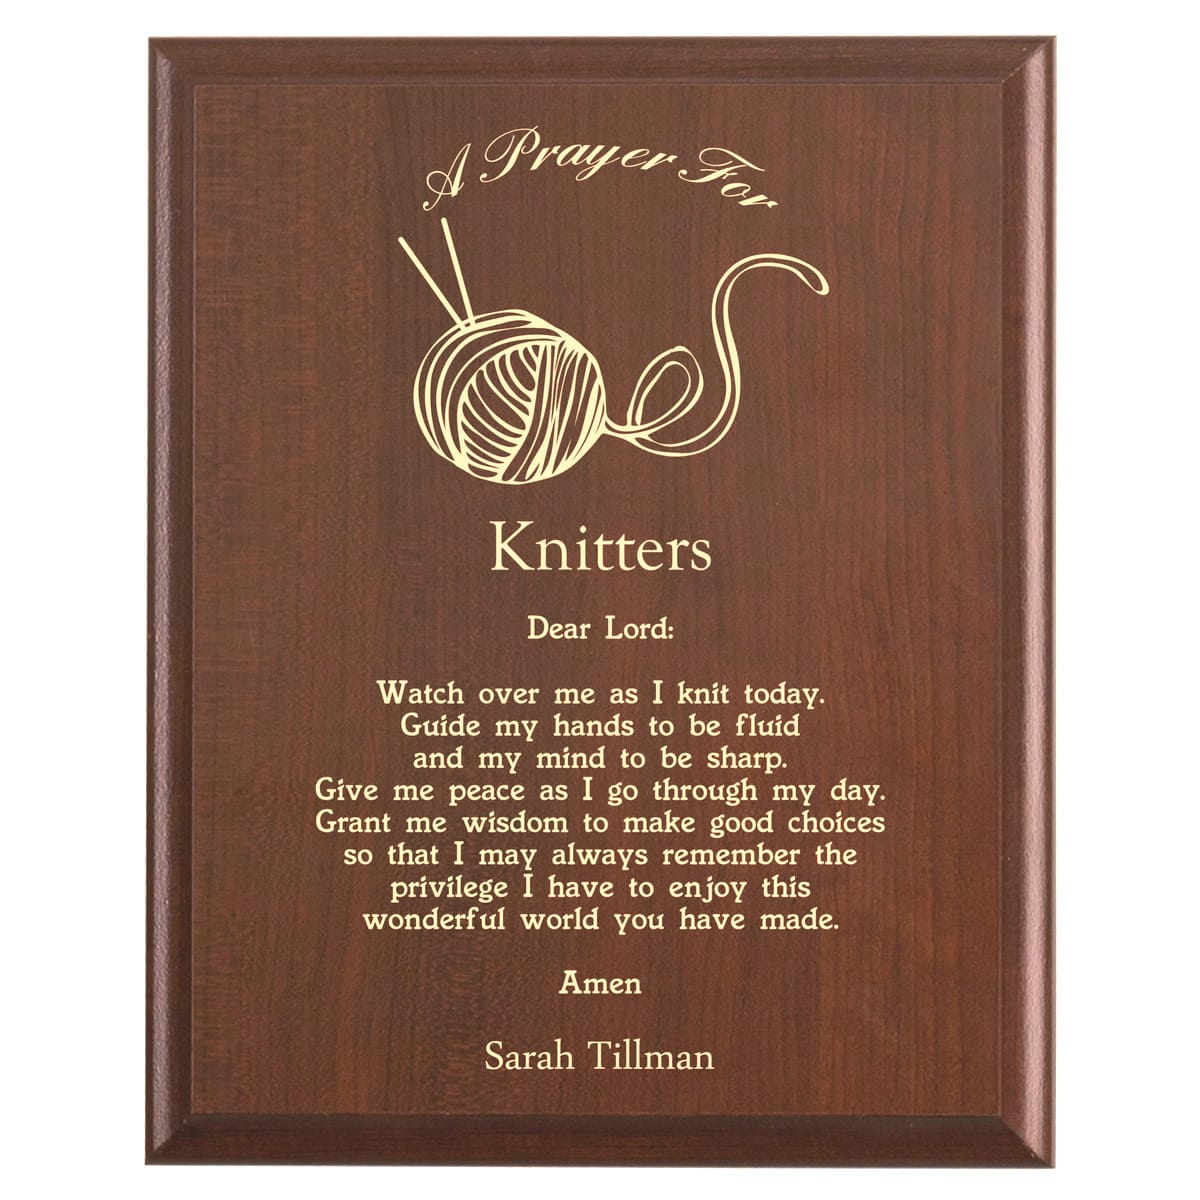 Plaque photo: Knitters Prayer Plaque design with free personalization. Wood style finish with customized text.